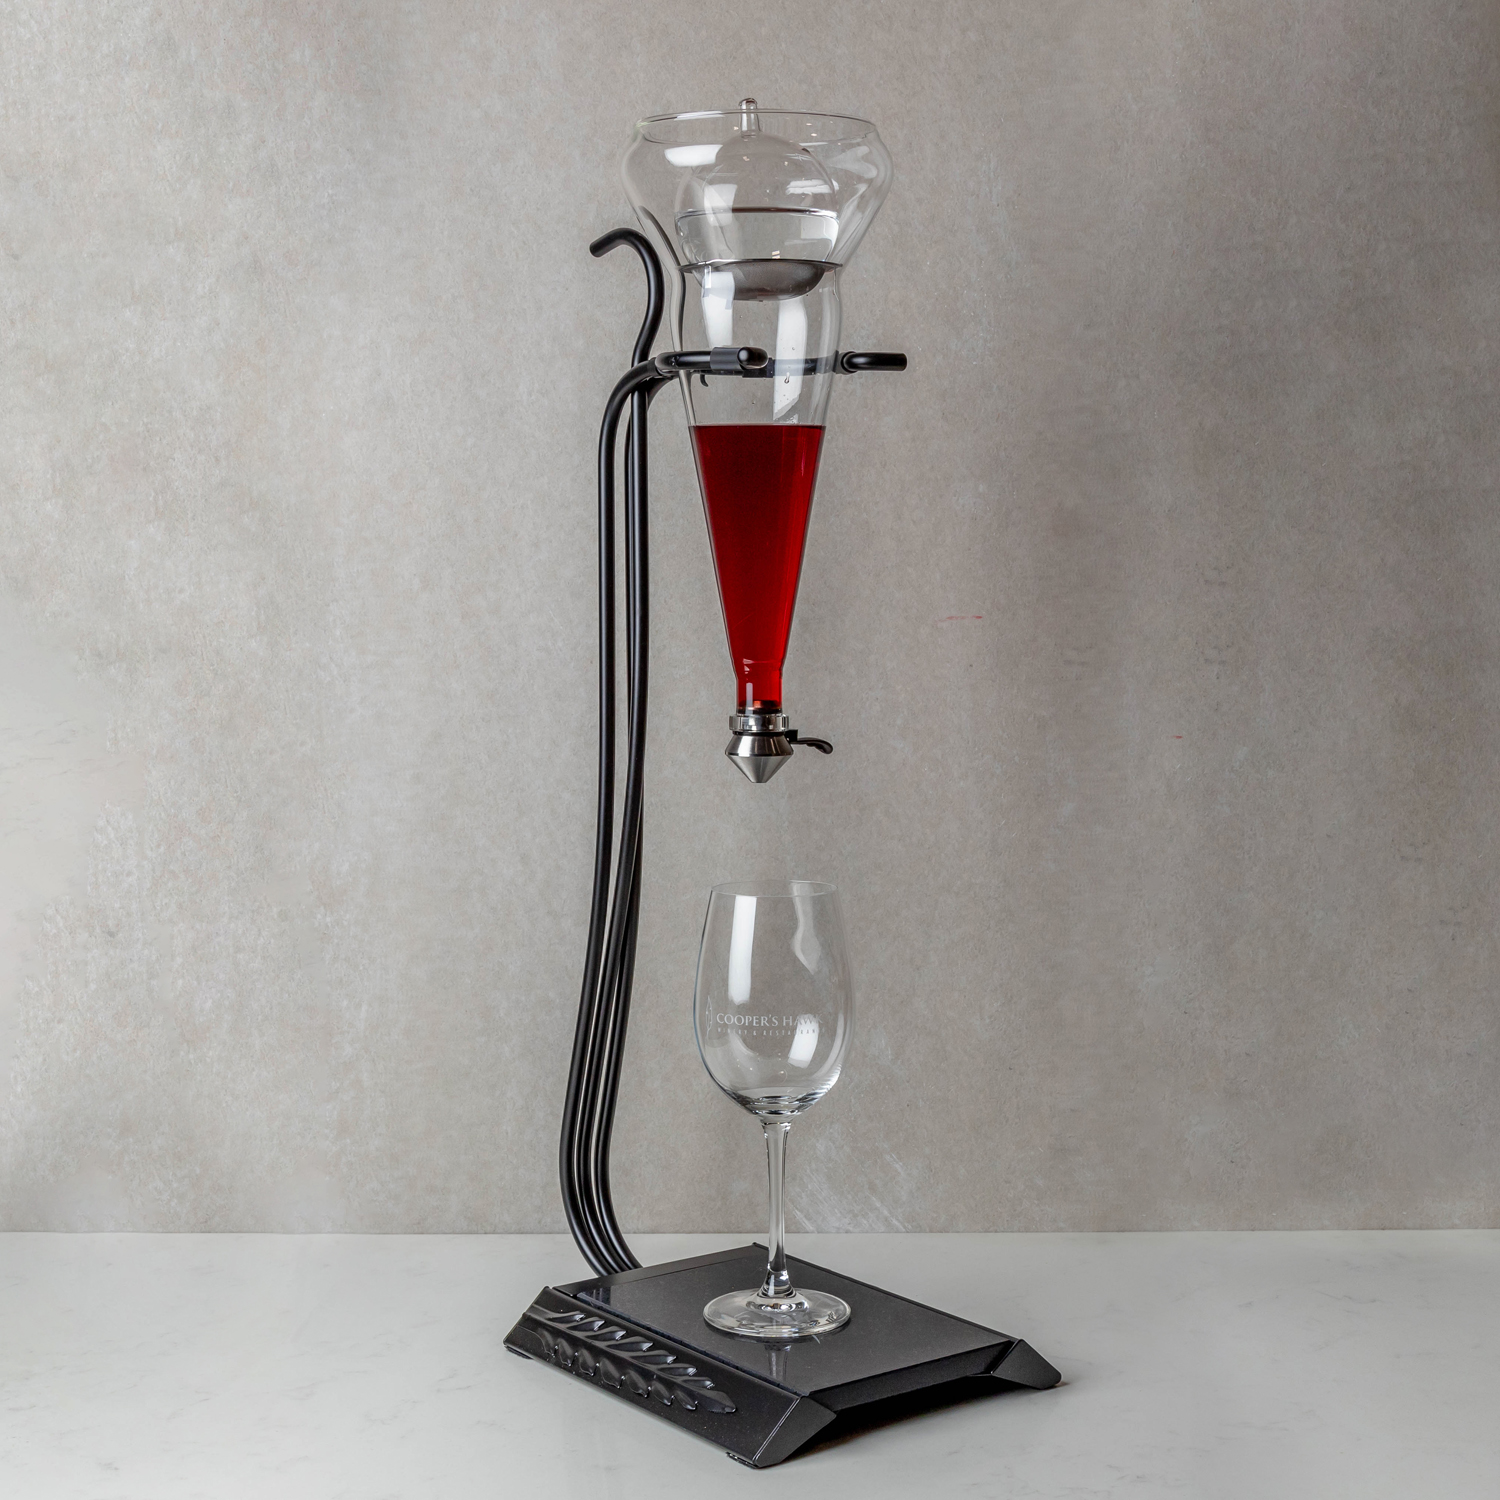 https://shop.coopershawkwinery.com/images/product/P/GRAPEVINE%20DECANTER%20W%20WINE.jpg